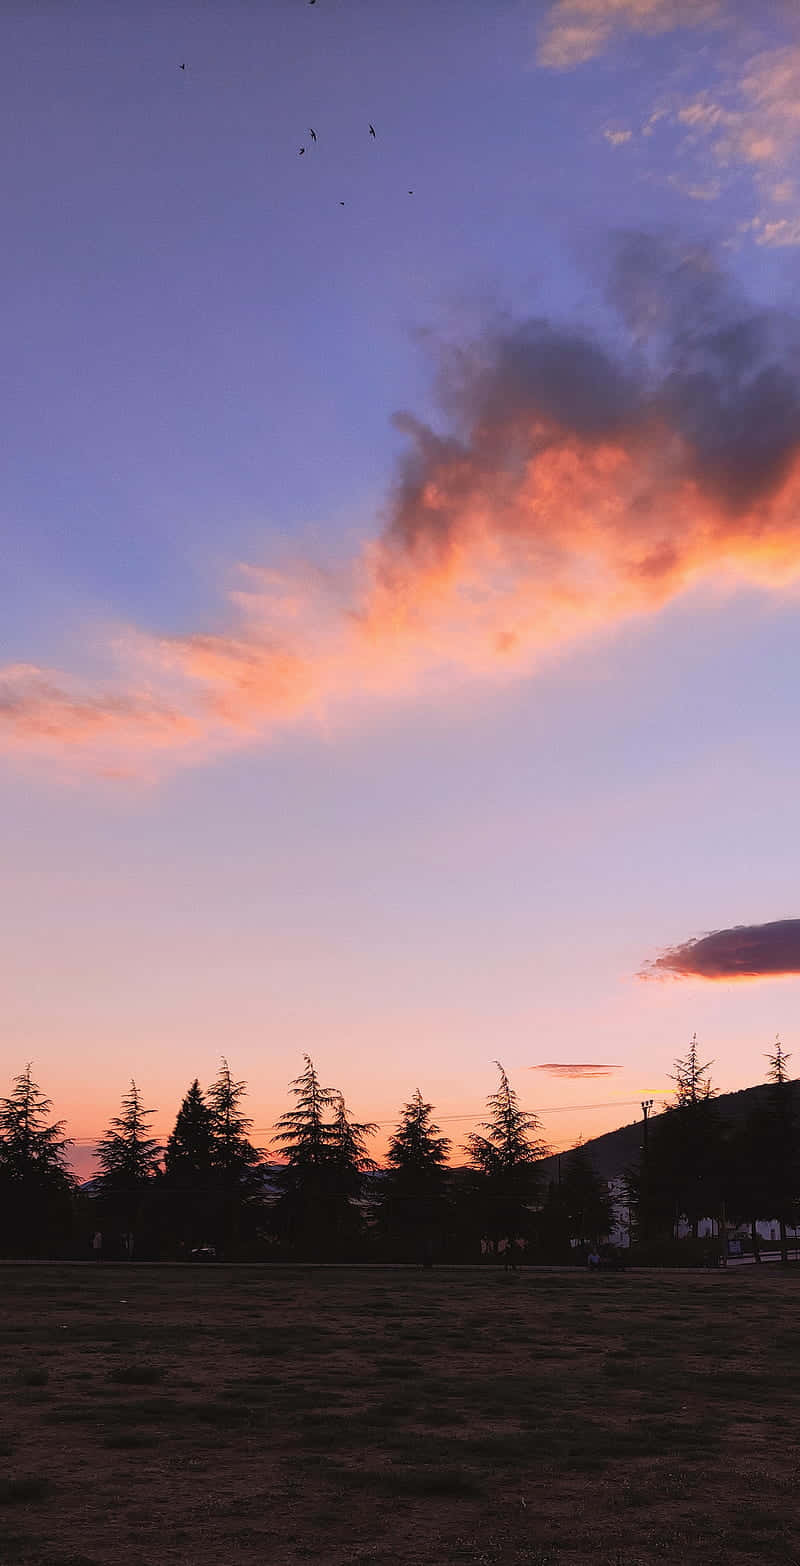 Sunset Cloud And Pine Trees Wallpaper